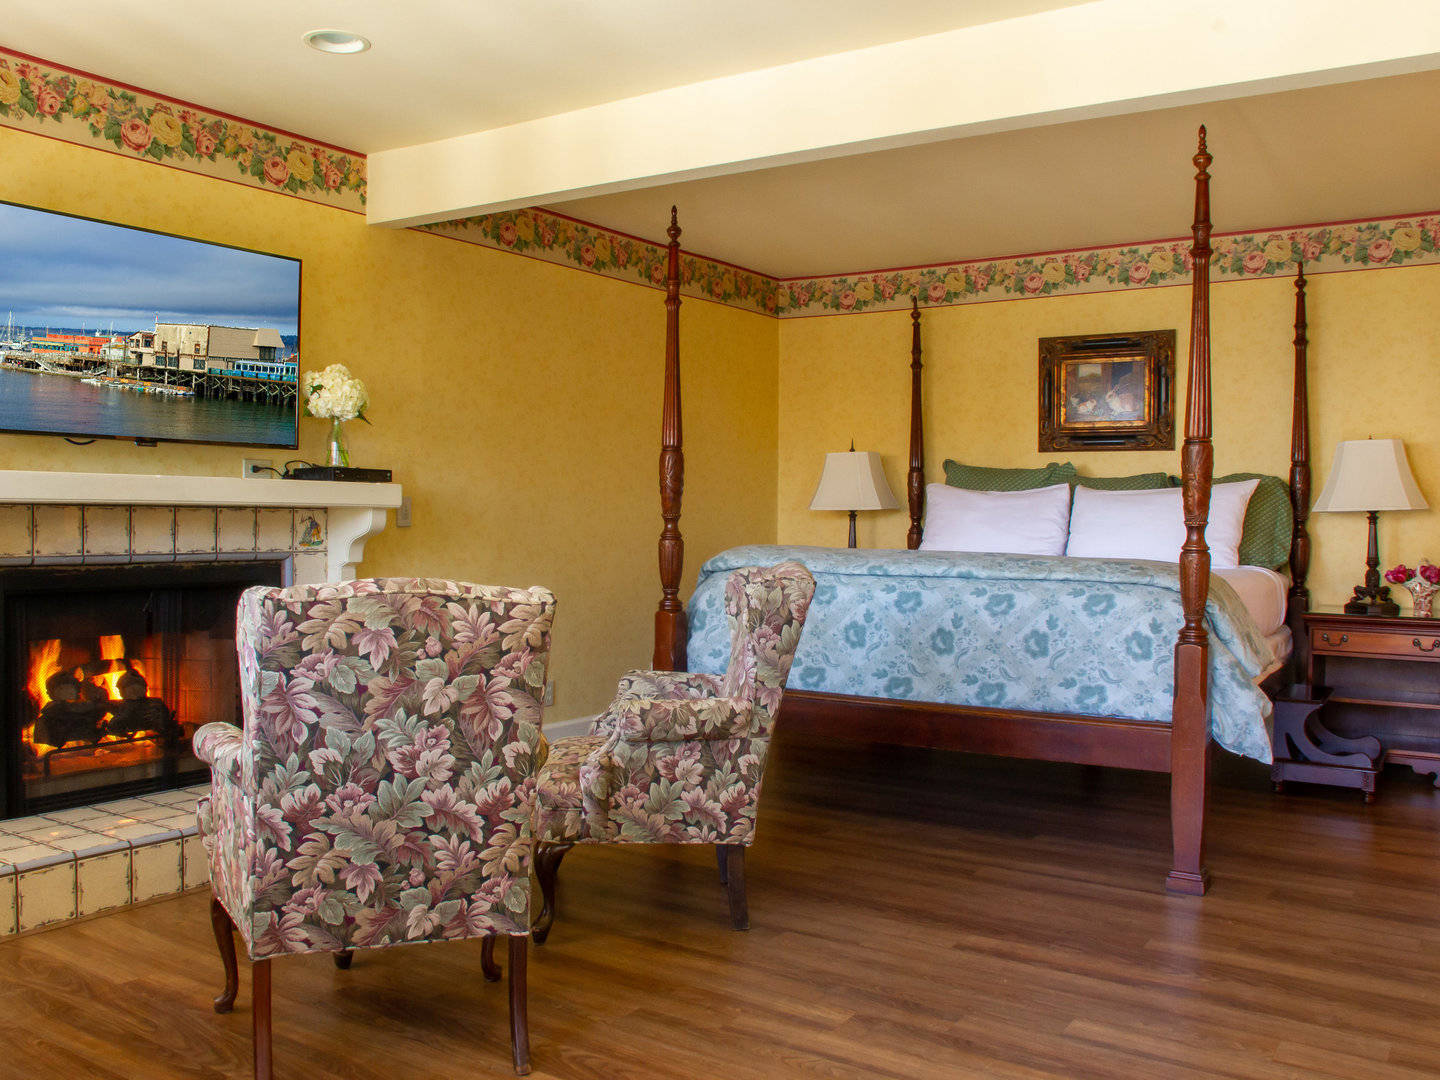 Pacific Grove Bed and Breakfast